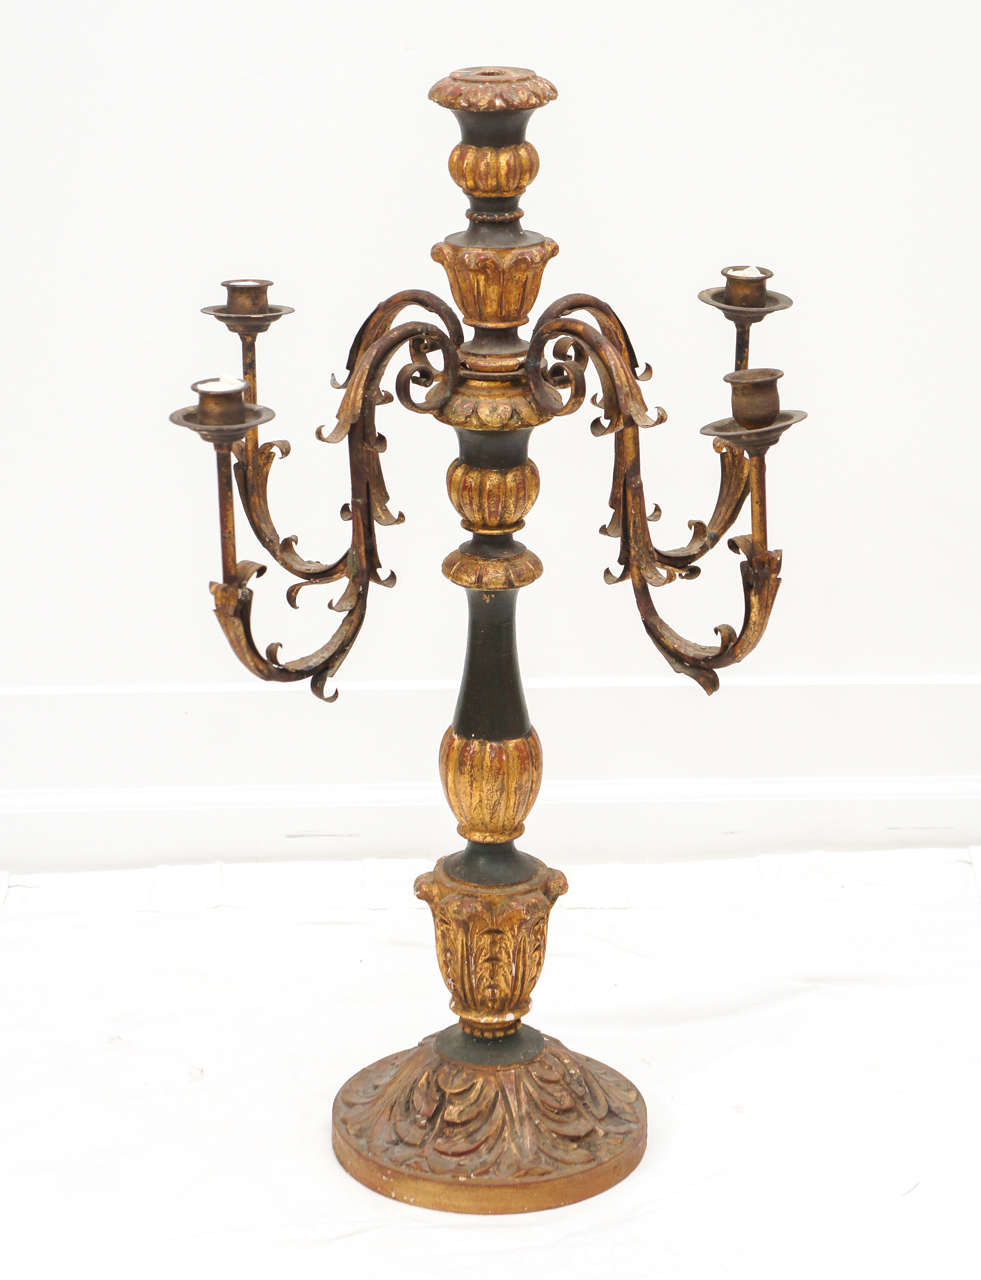 the wear and patina on this lovely candelabra is superb.
a beautiful piece to light up that romantic little spot!
its in very good condition, with wear from age which enhances this piece.